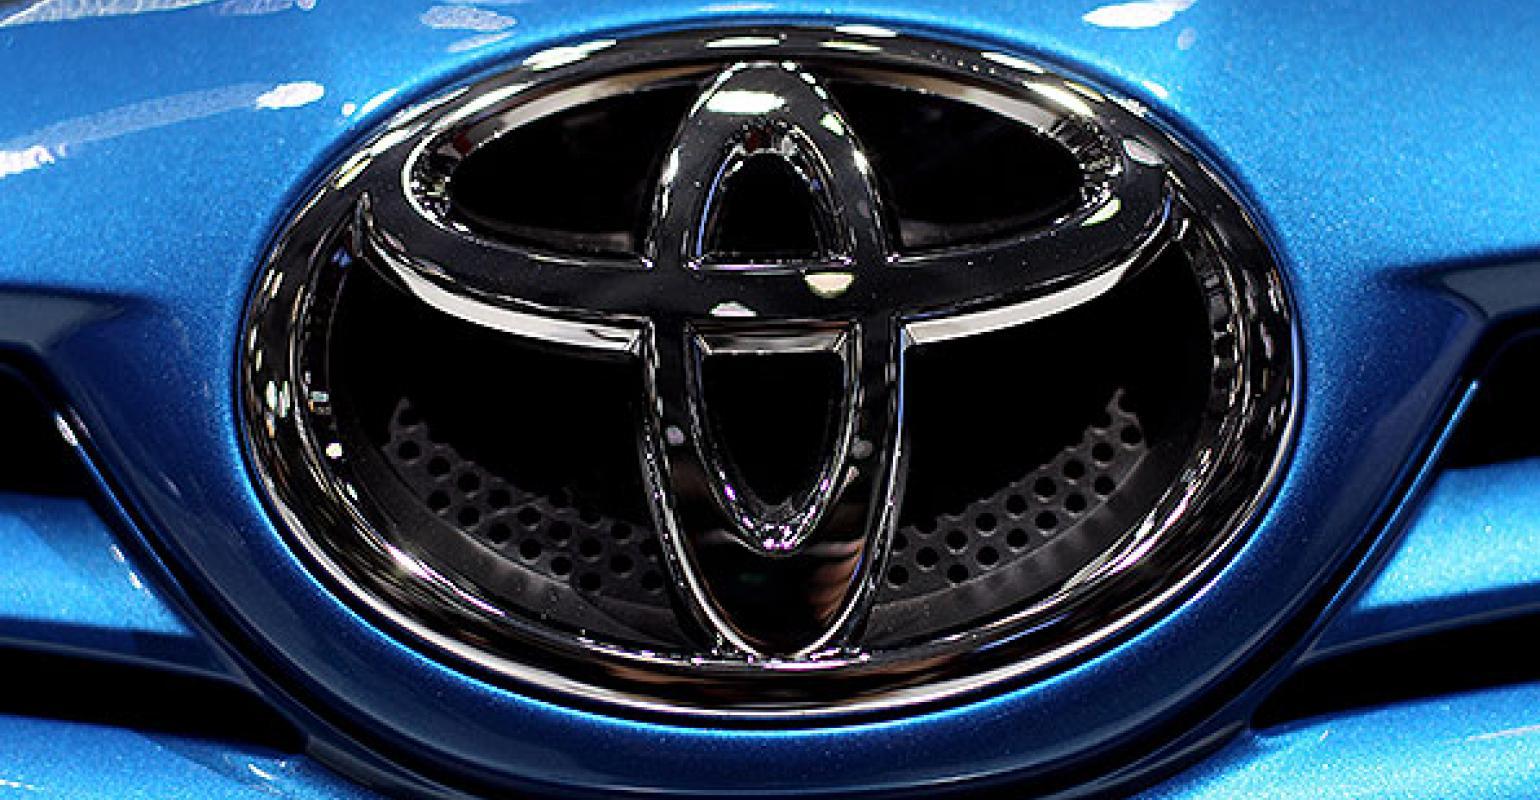 Toyota Kentucky Logo - Toyota to Invest $1.33 in Kentucky Plant. Camry Redesign Adopts